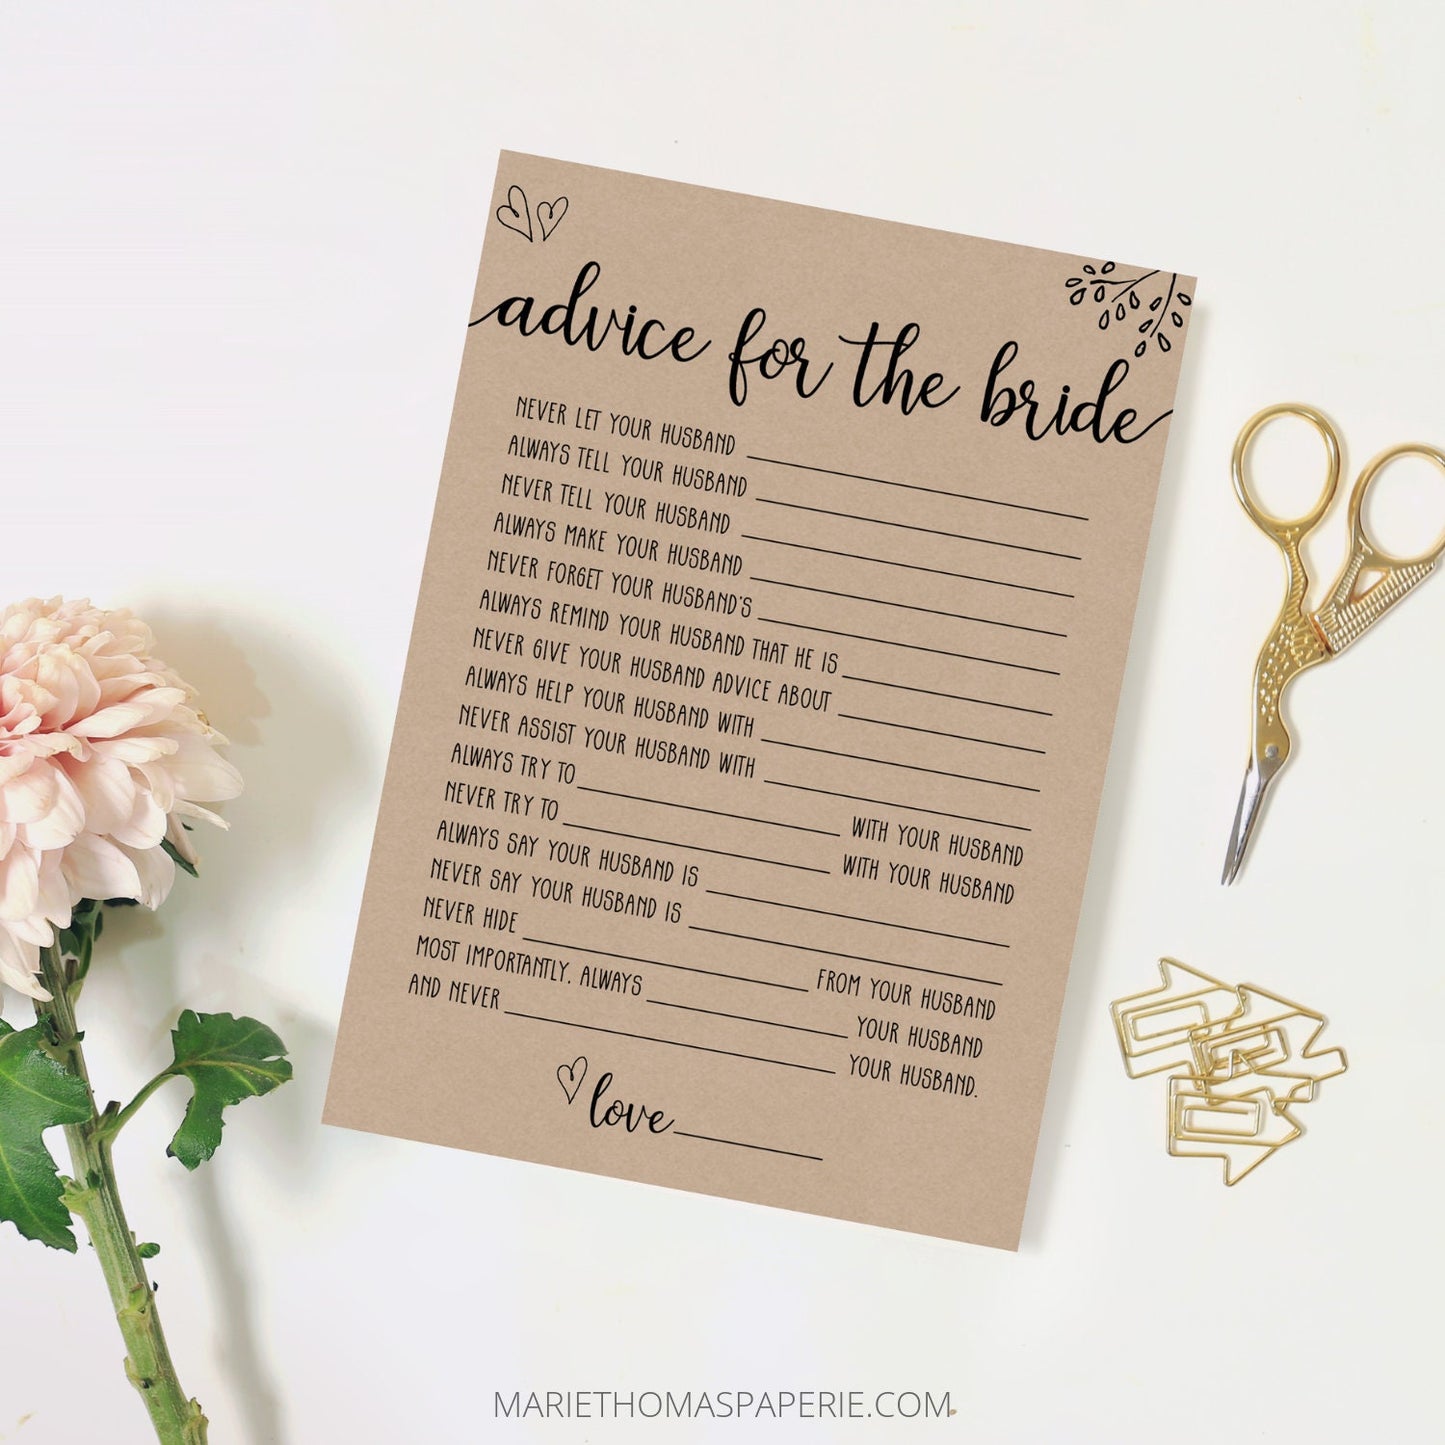 Editable Advice for the Bride Bridal Shower Games Rustic Kraft Paper & Black and White Template